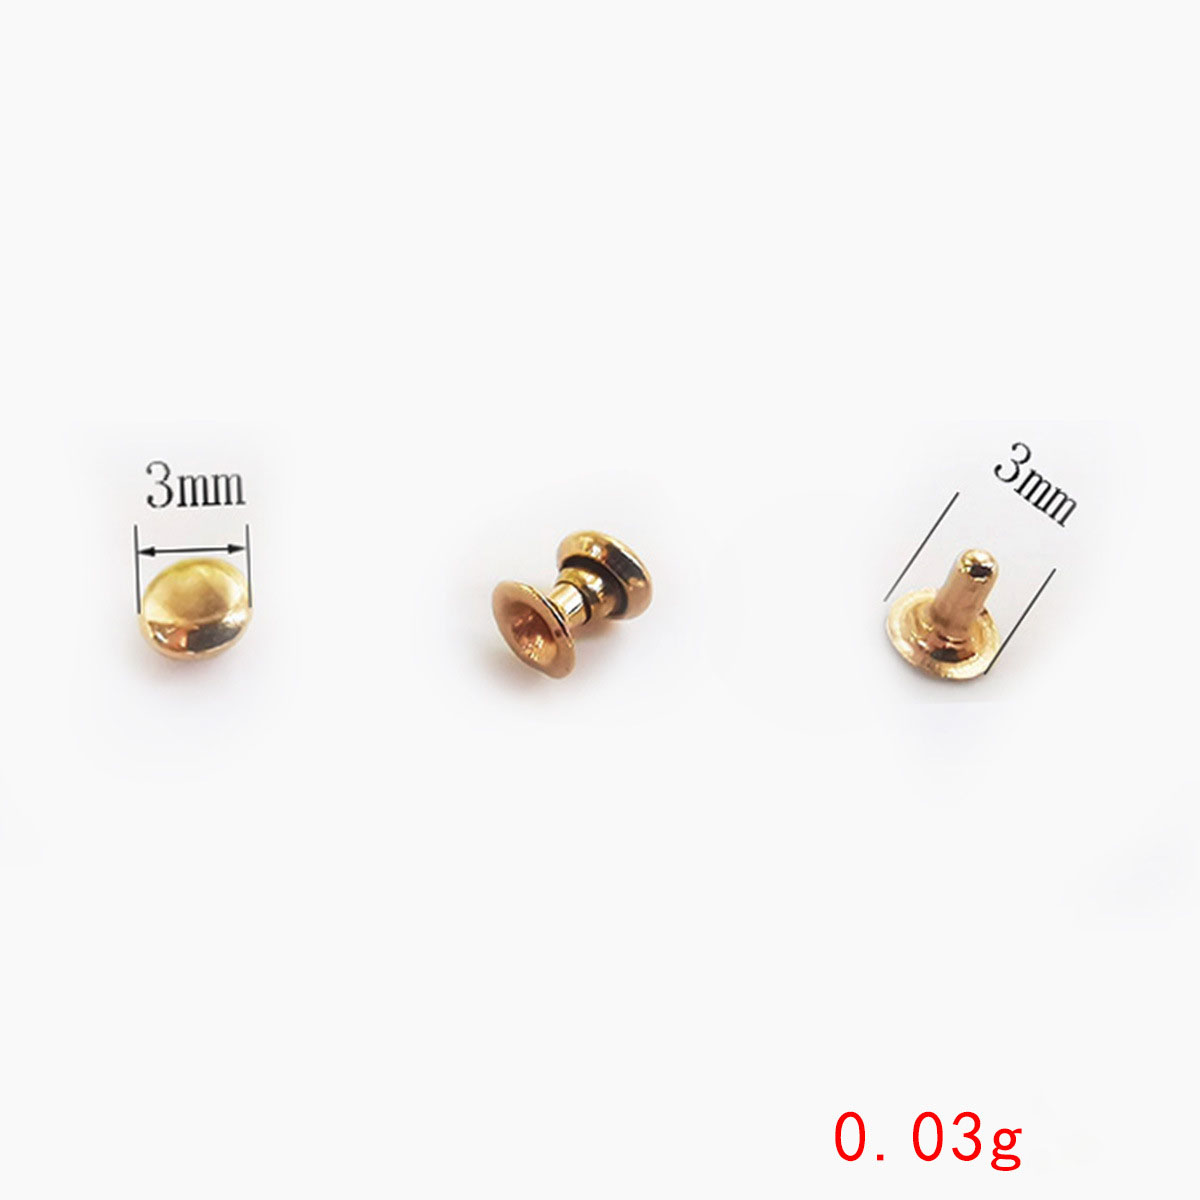 3mm gold